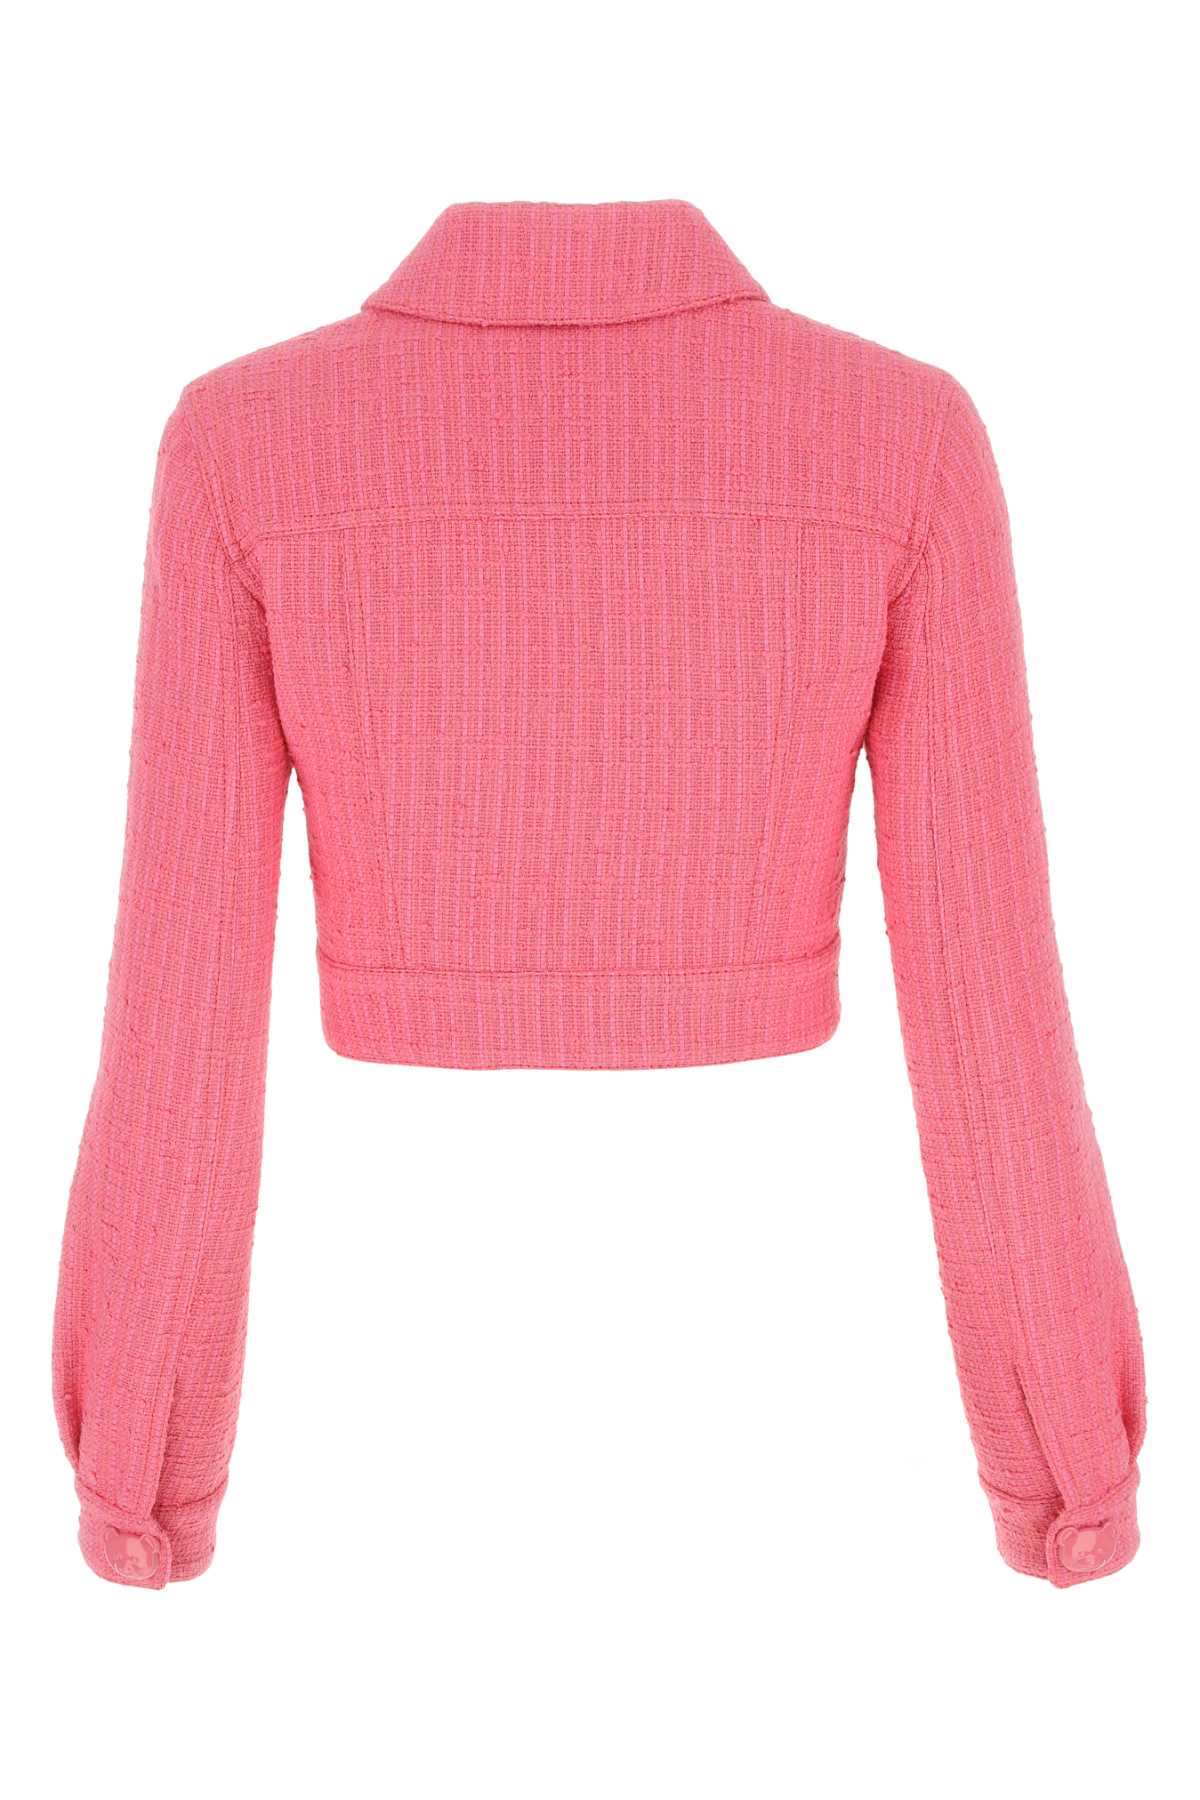 Moschino Pink Boucle Jacket In 0205